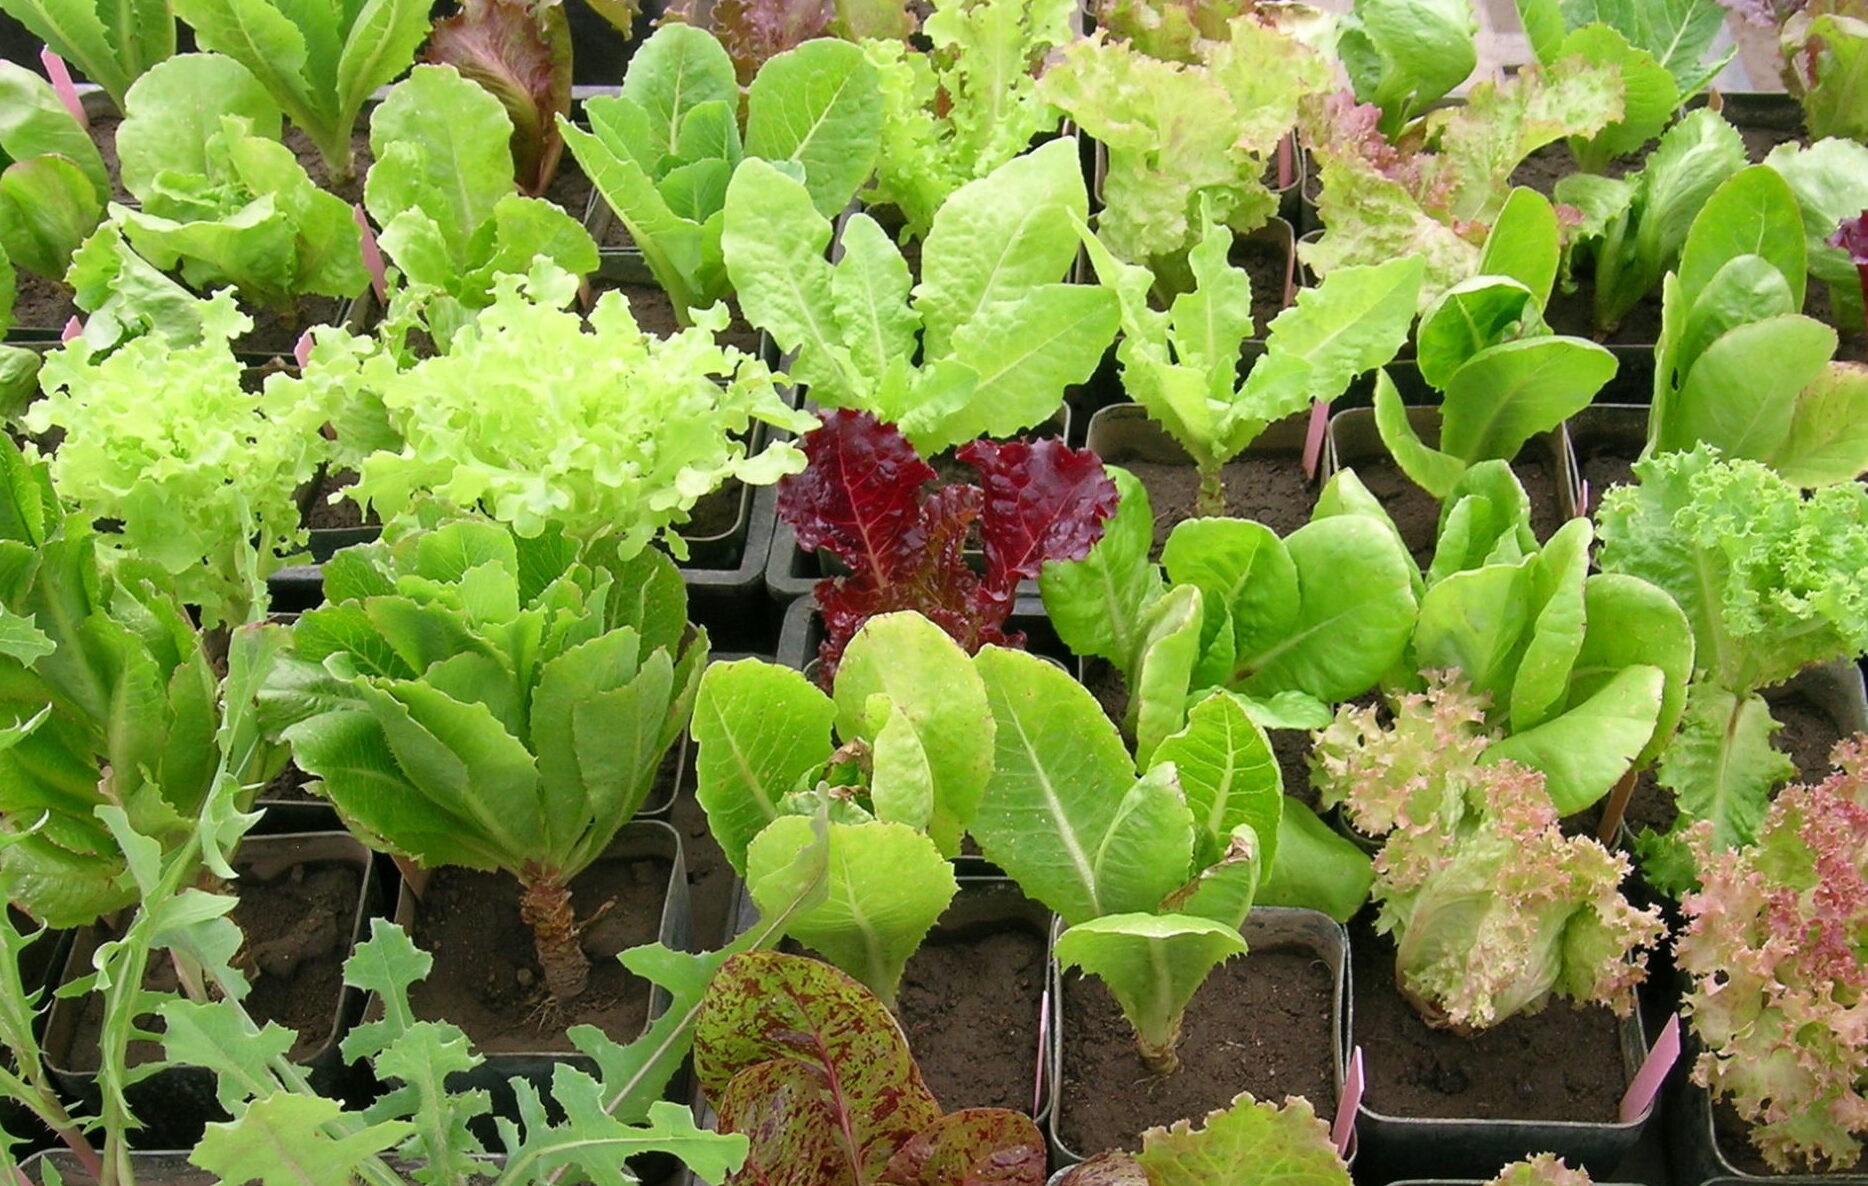 A tray full of lettuce seedlings of diverse varieties, colors and textures